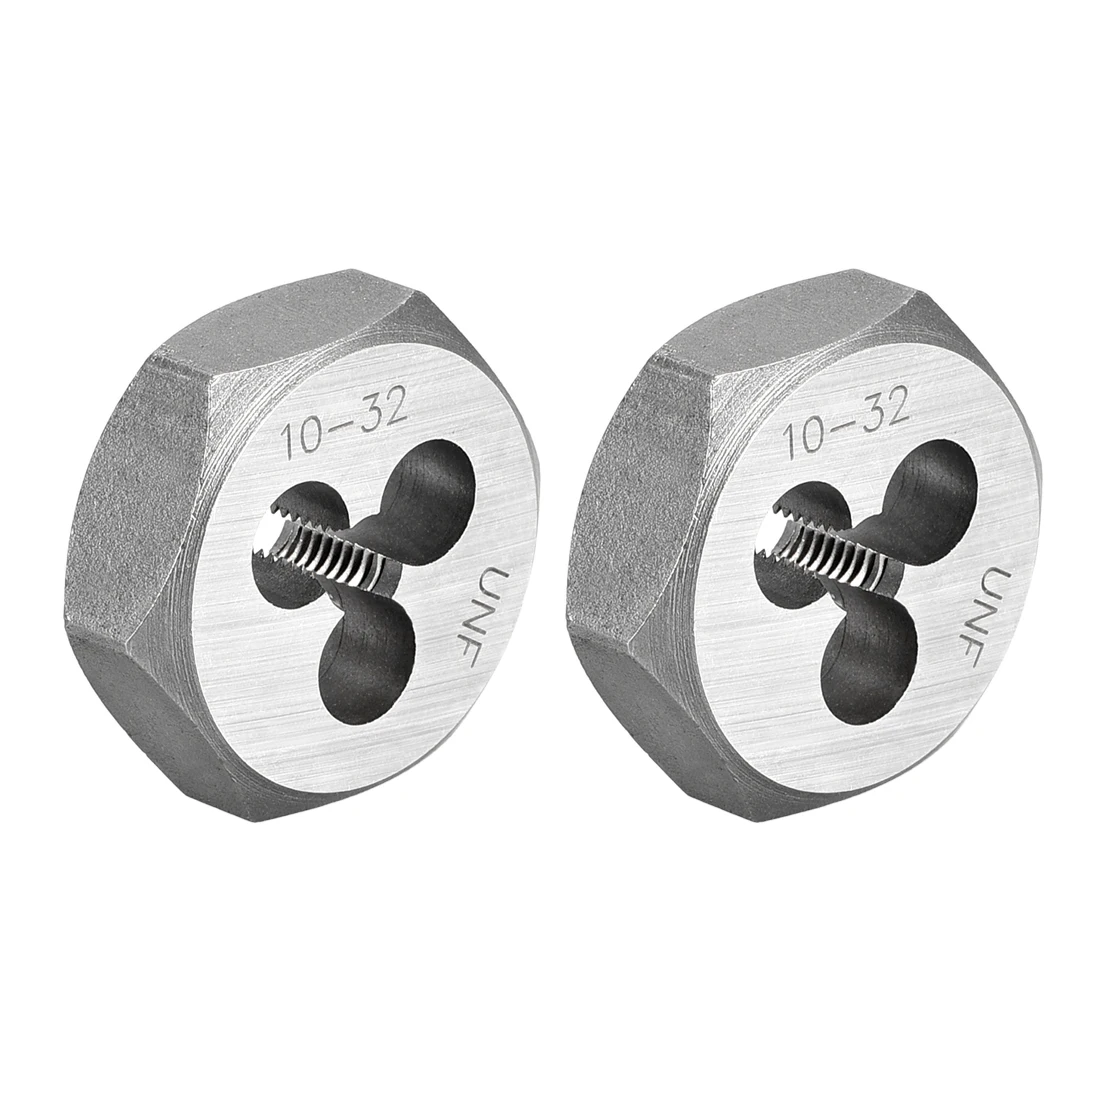 

uxcell 2 pcs 10-32 UNF Hex Rethreading Dies, Carbon Steel Hexagon Taper Pipe Die, Accuracy Grade: 2A